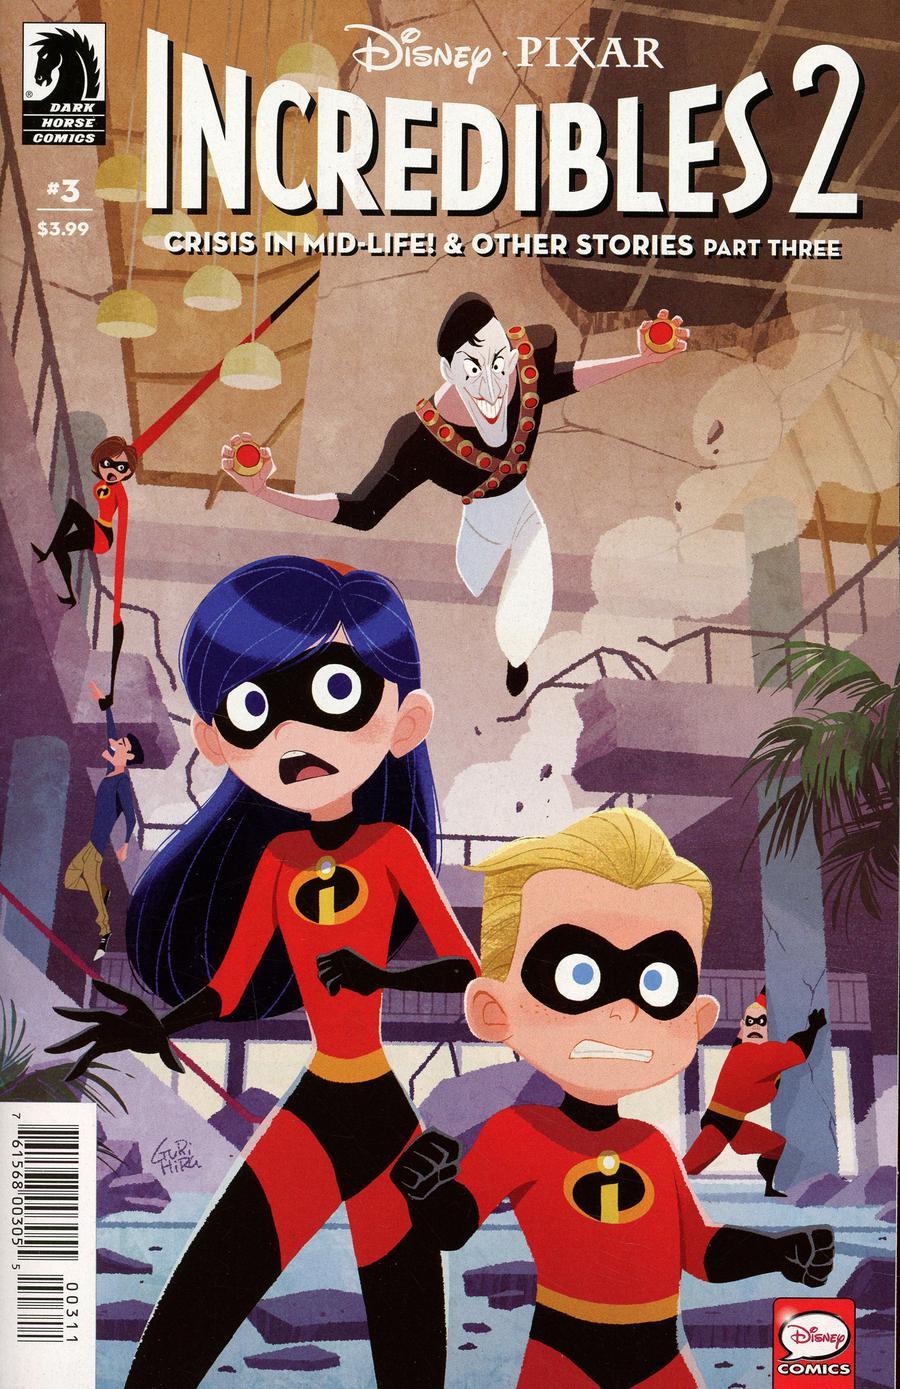 Disney Pixars Incredibles 2 Crisis In Mid-Life & Other Stories Vol. 1 #3